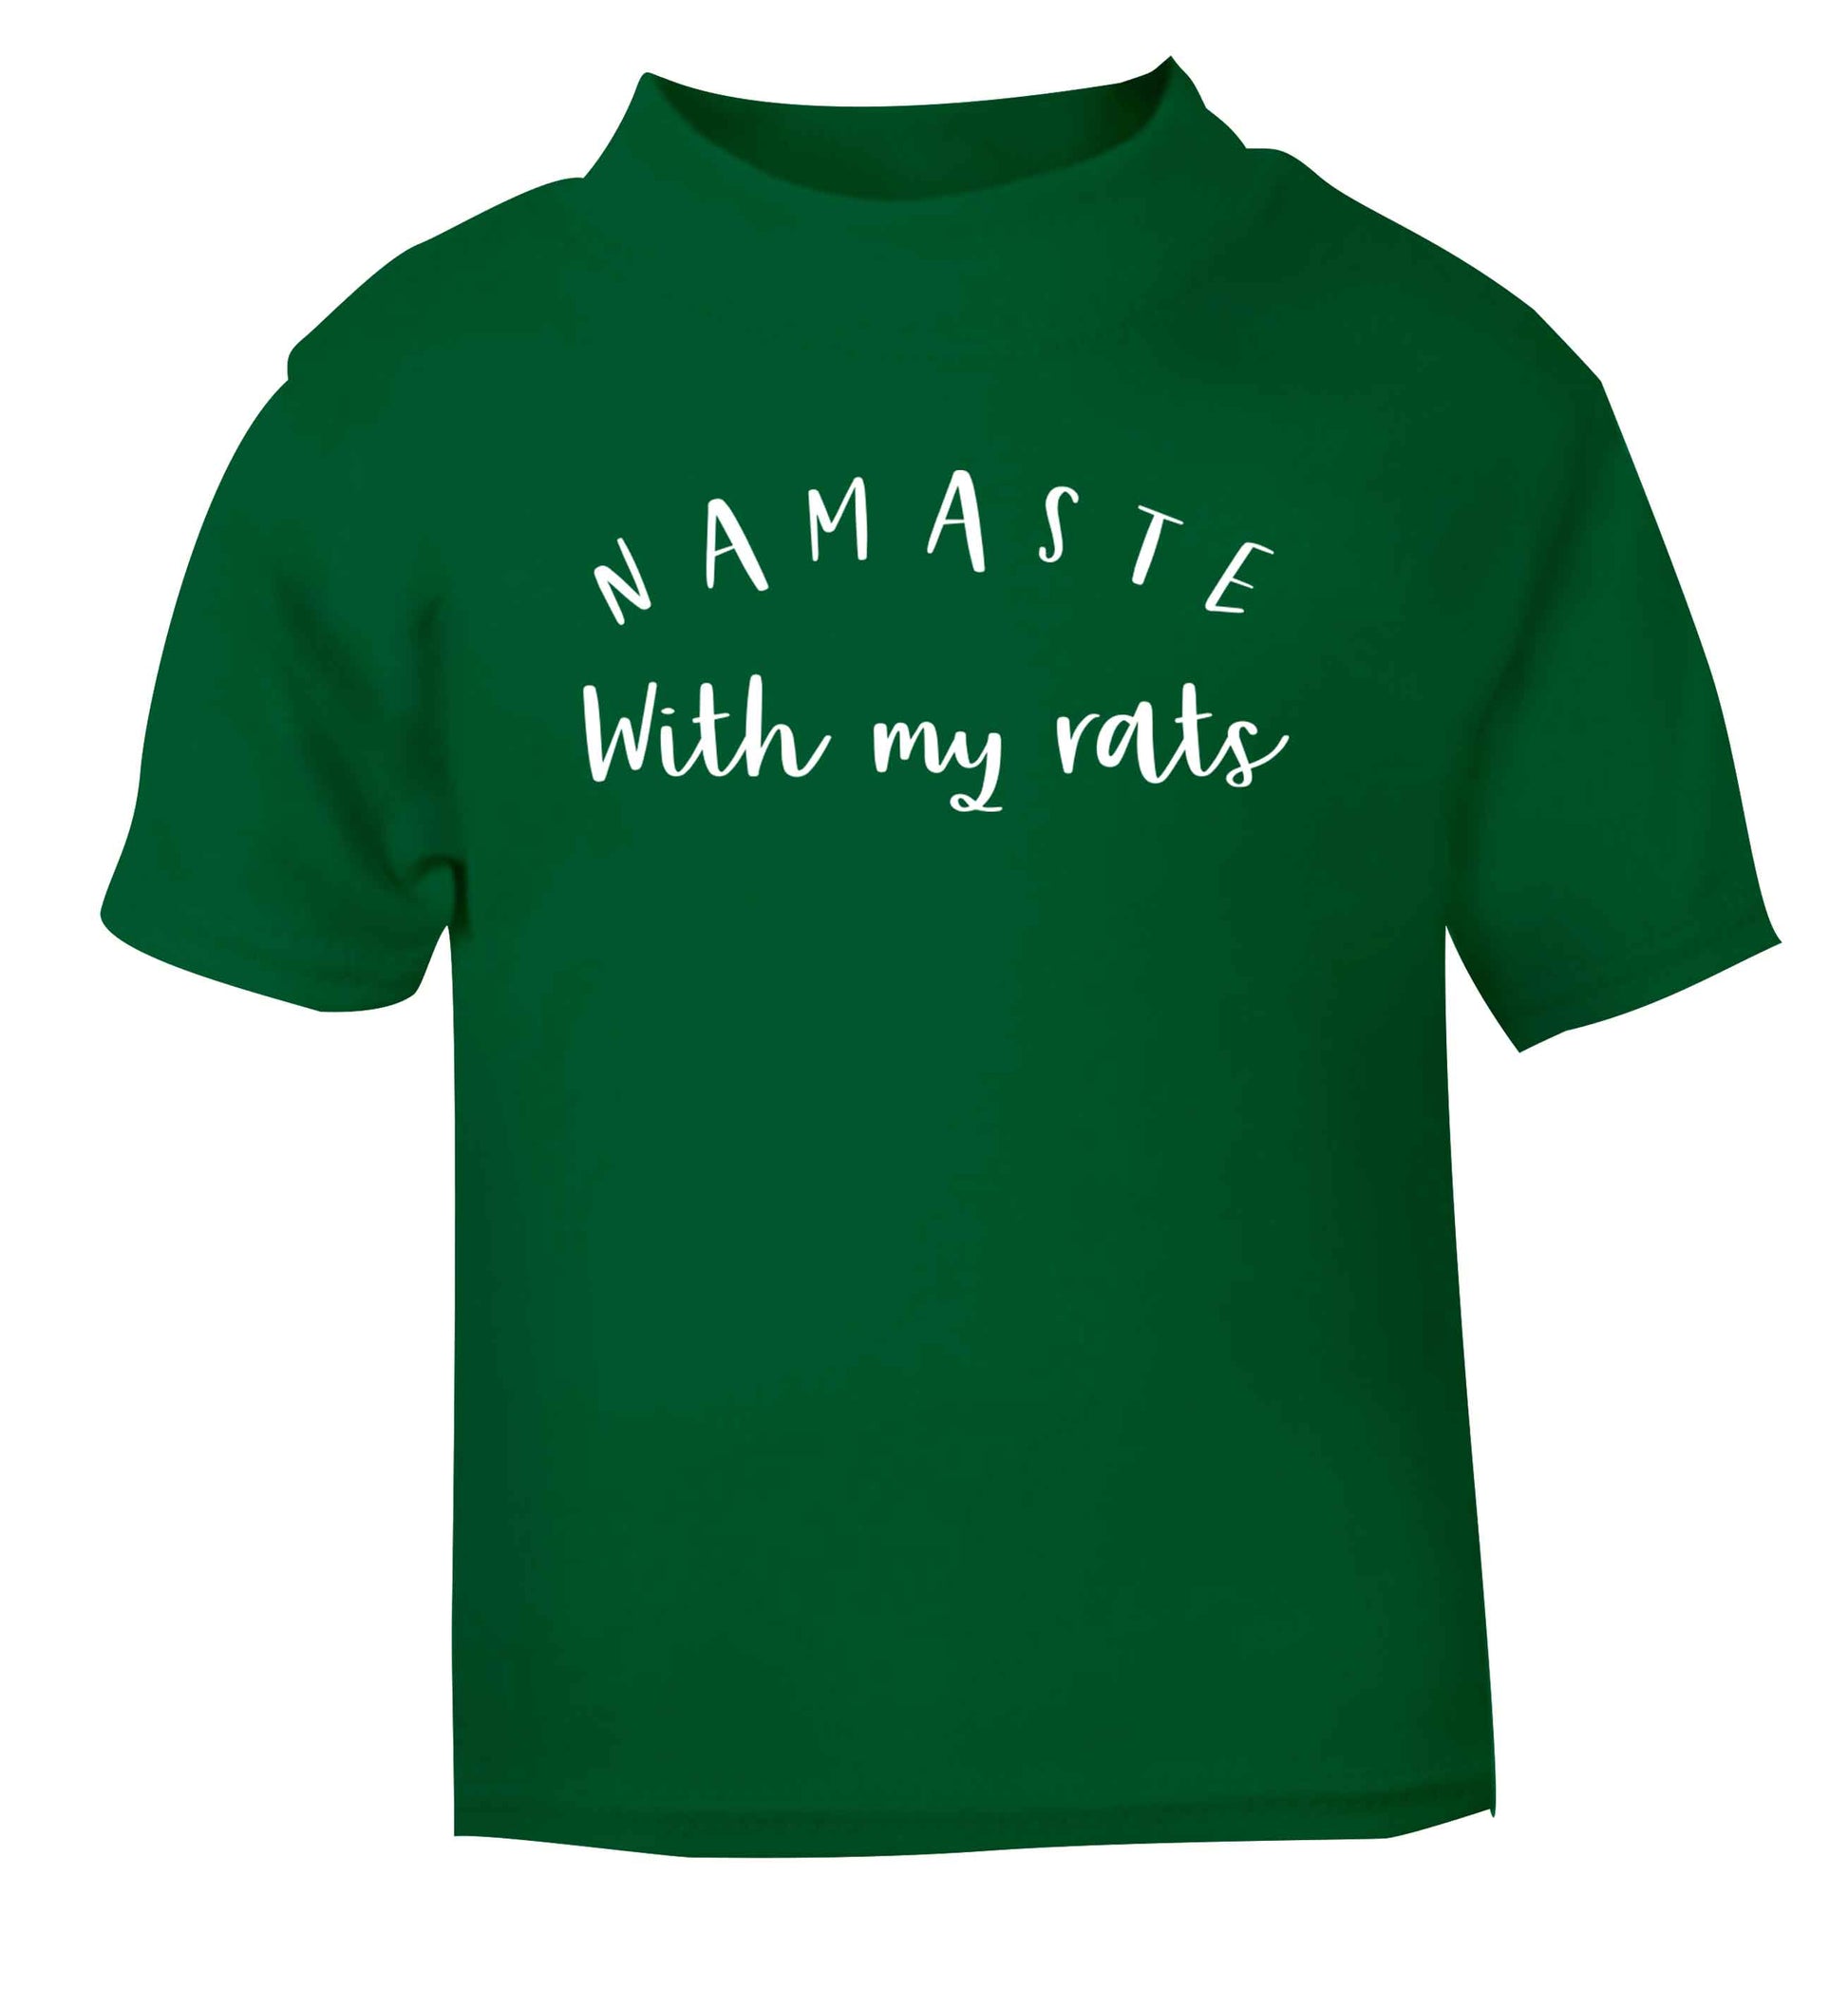 Namaste with my rats green Baby Toddler Tshirt 2 Years